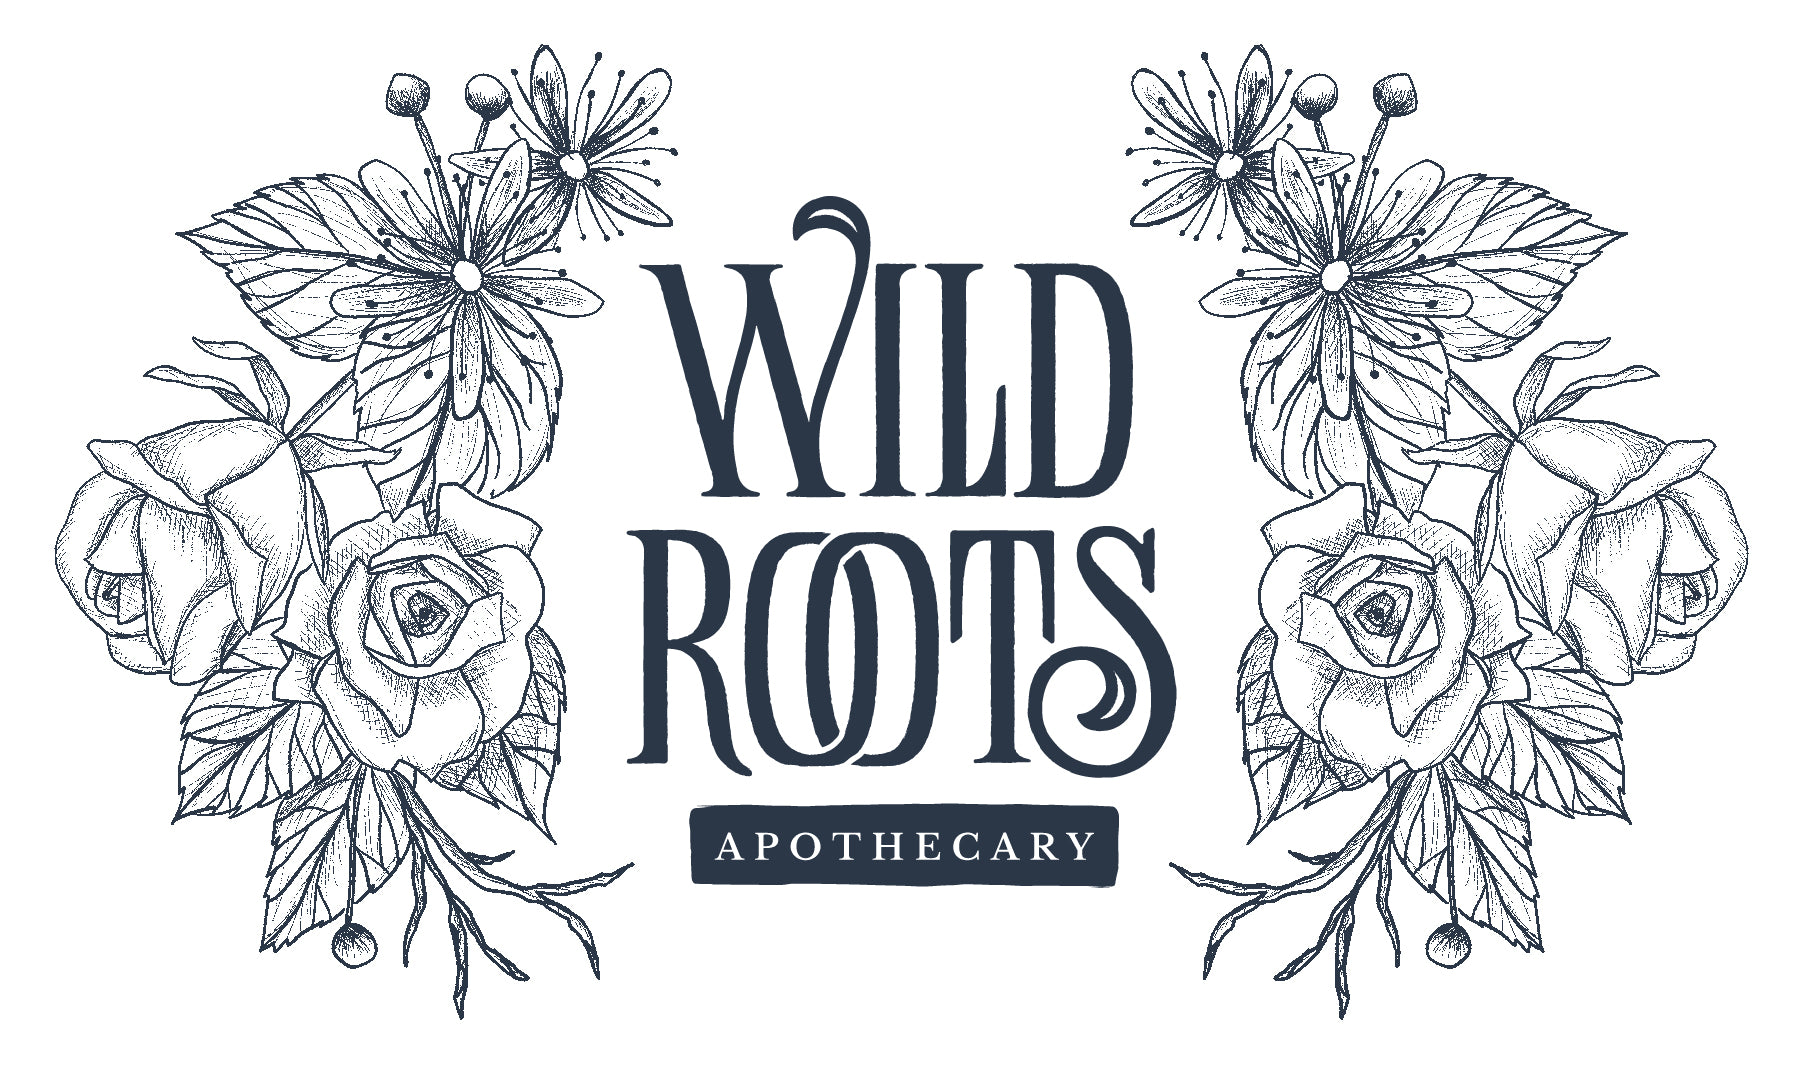 wild roots apothecary